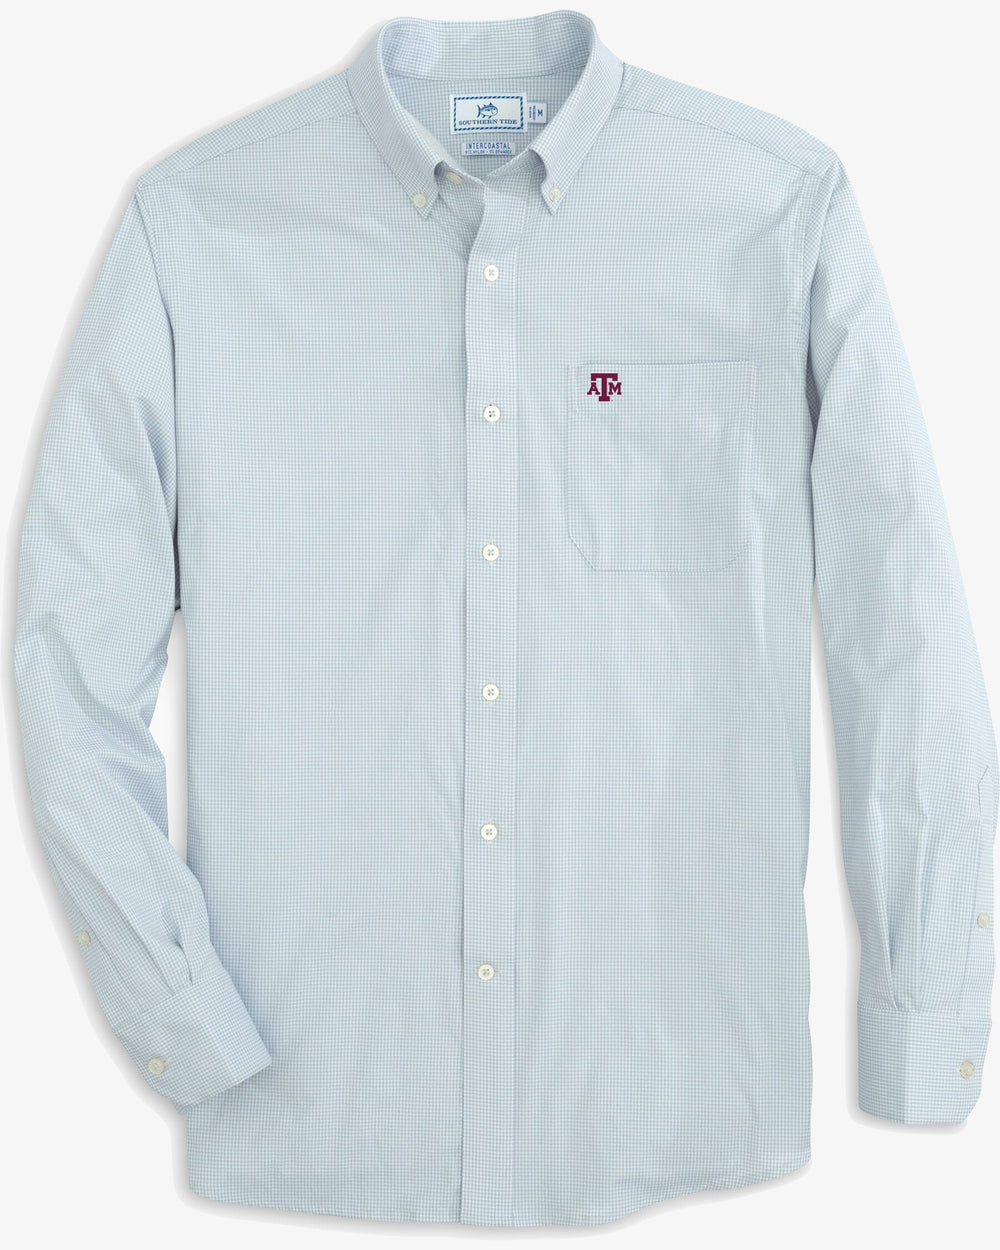 The front view of the Texas A&M Aggies Gingham Button Down Shirt by Southern Tide - Slate Grey